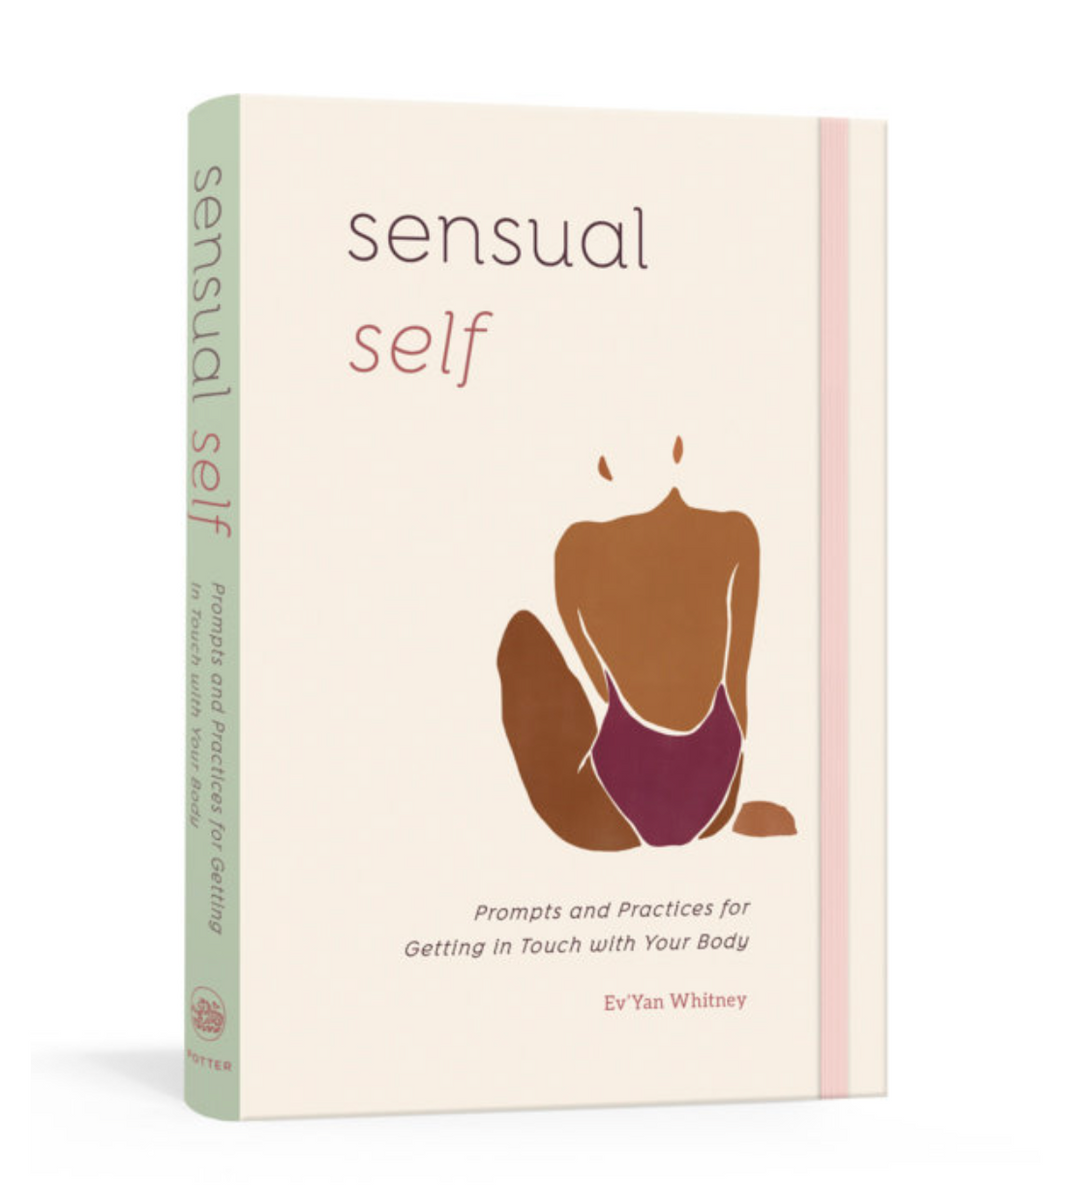 Sensual Self: Prompts and Practices for Getting in Touch With Your Body